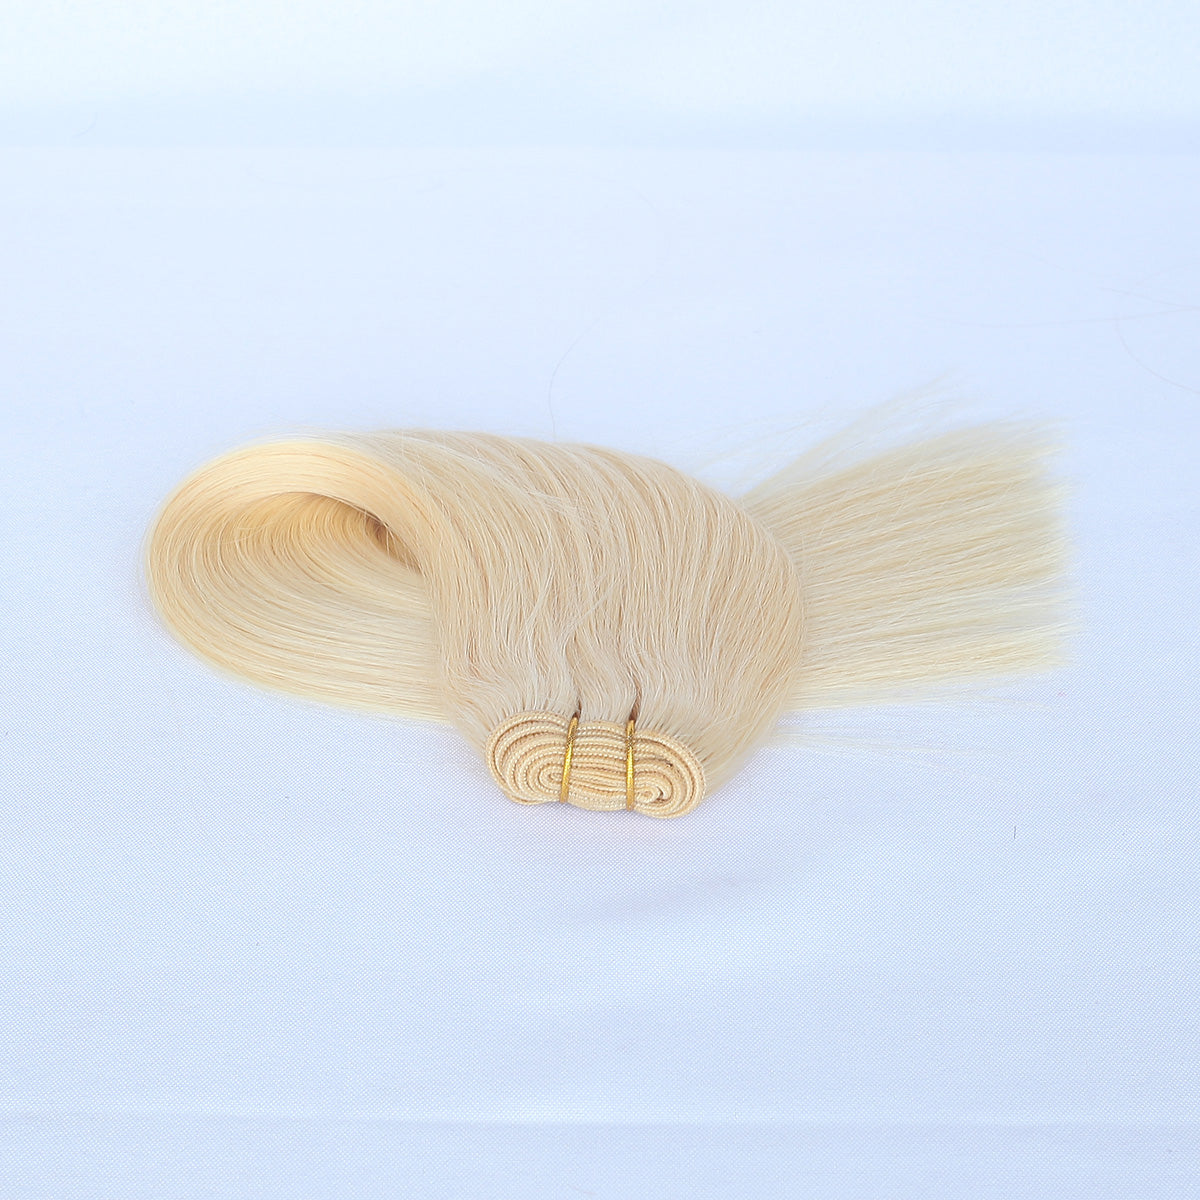 Bleached Blonde Straight Human Hair Wefts Extensions